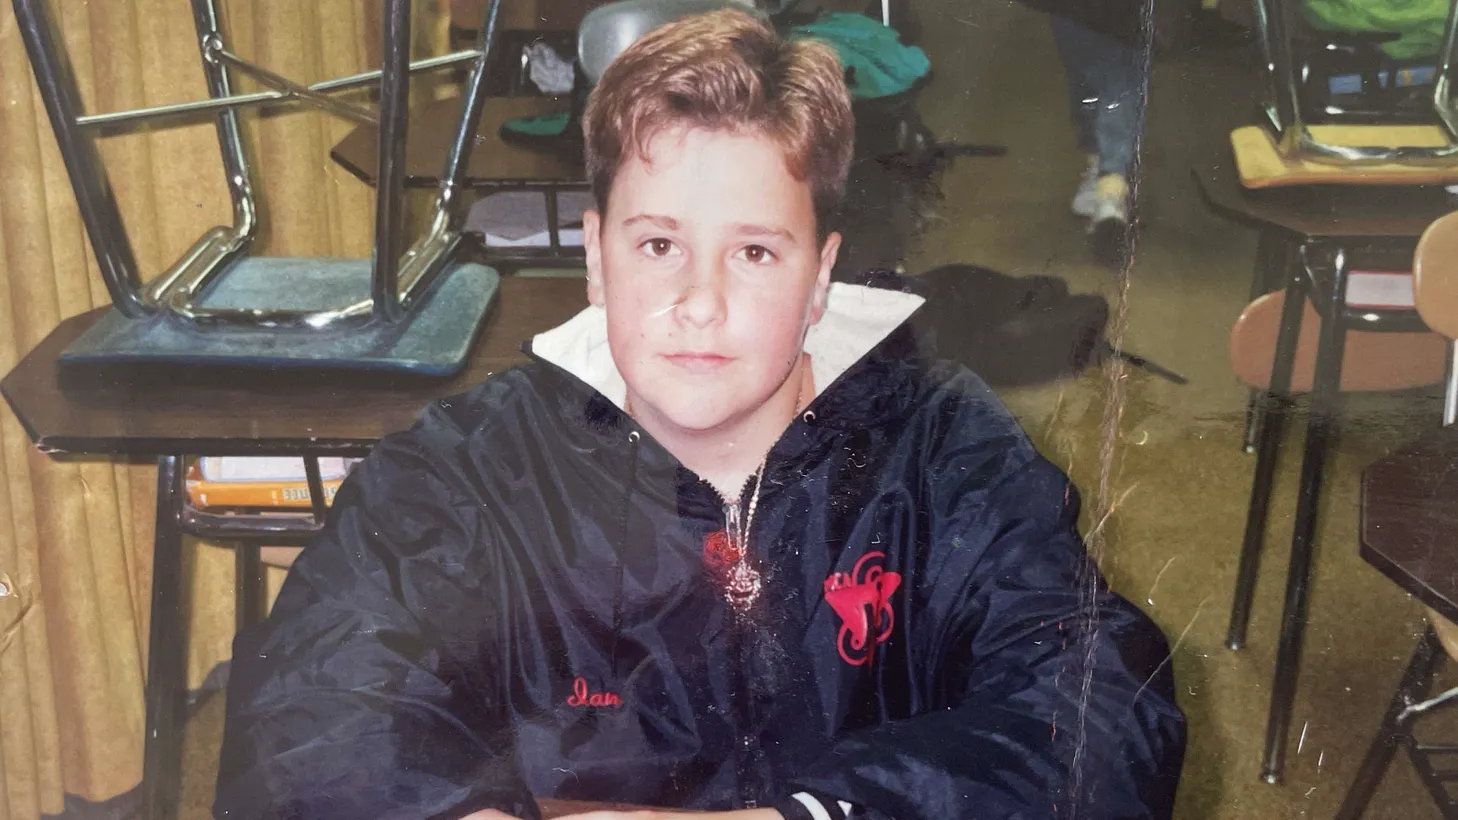 “When I was young years ago, being queer was a diagnosis and you could be segregated and separated from ‘normal kids.’ And that is a huge problem,” David Ambroz recalls of his early years in foster care. Pictured here, age 12.